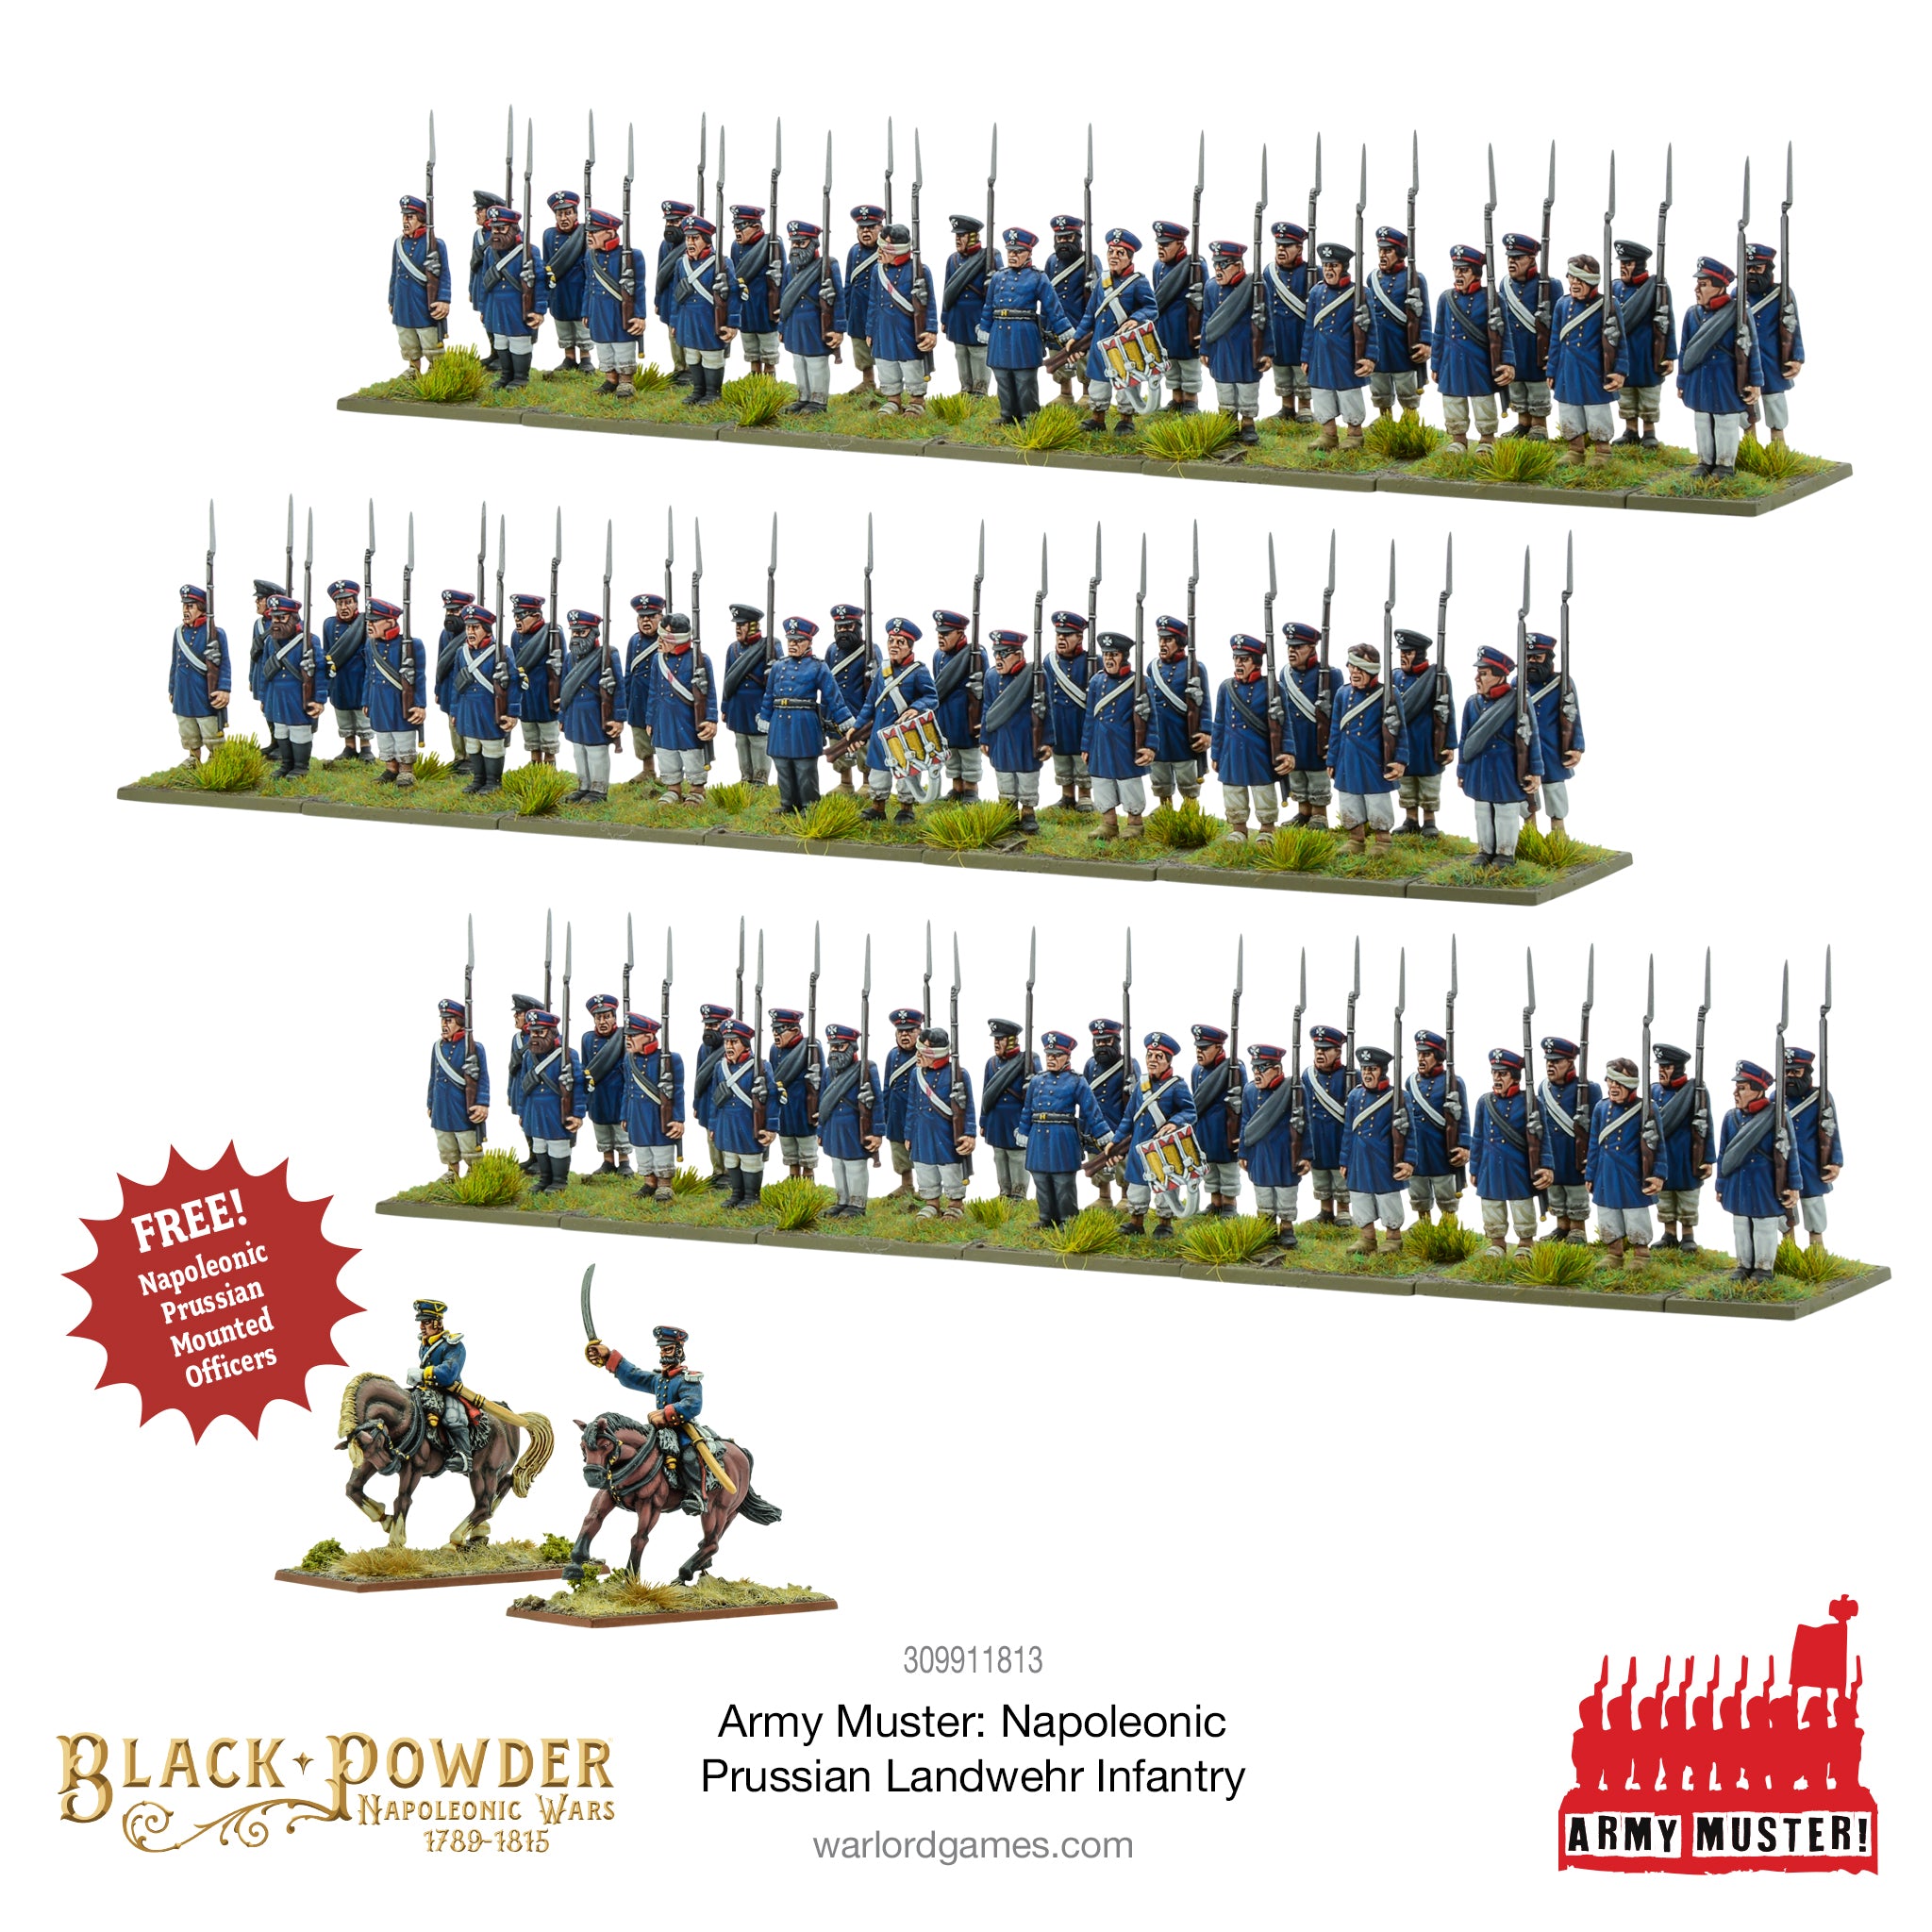 Army Muster: Napoleonic Prussian Landwehr Infantry